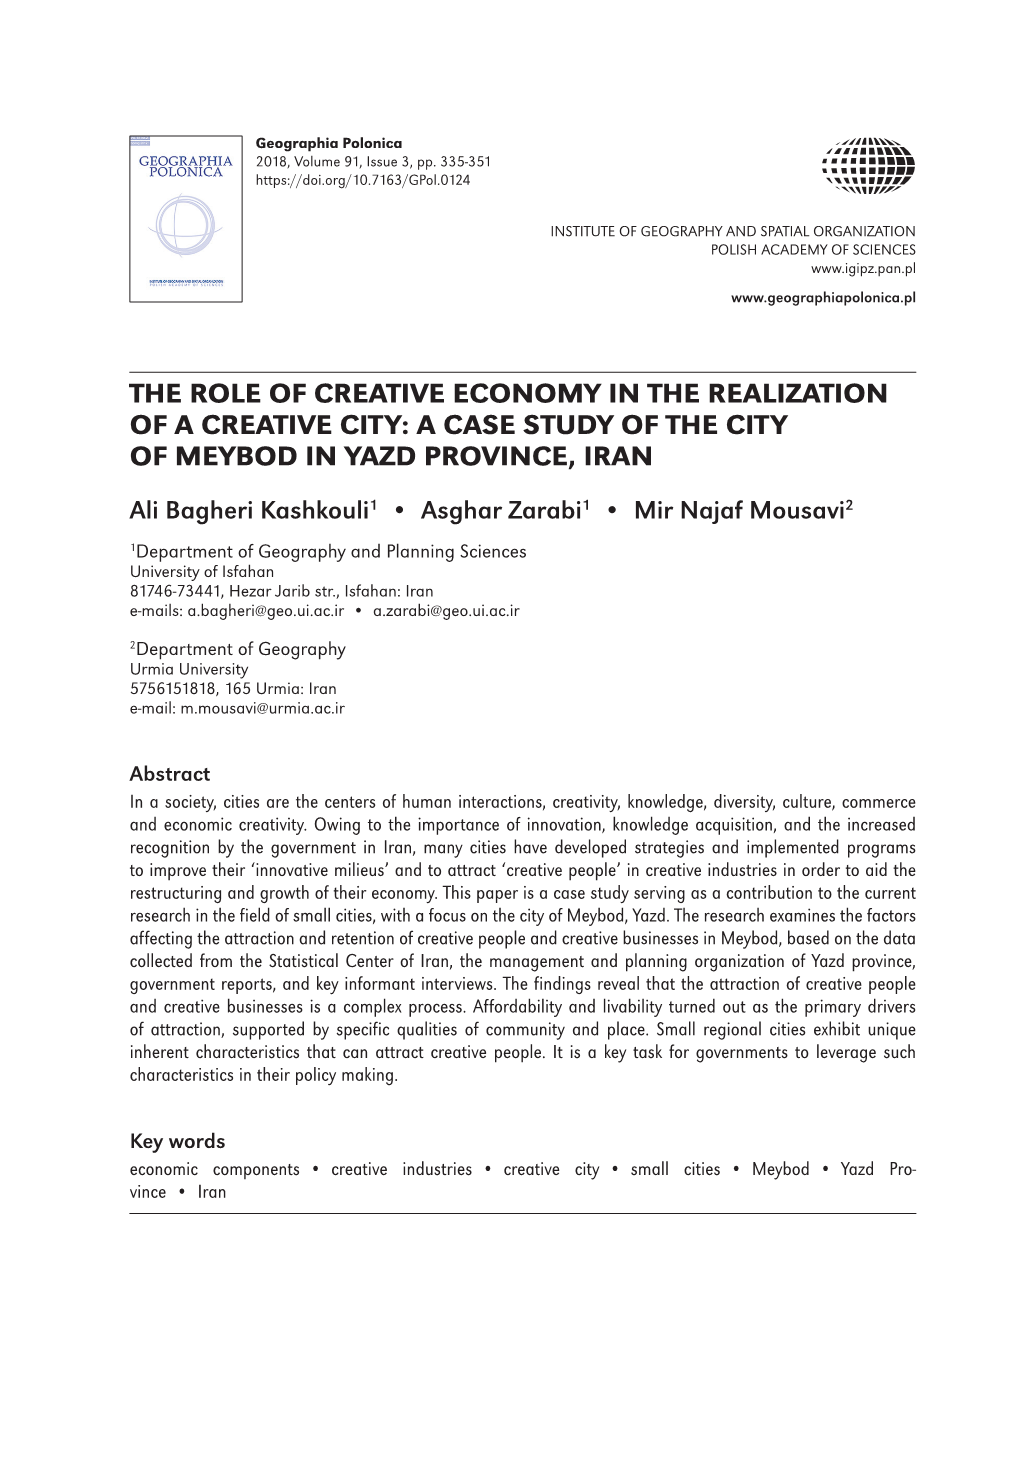 The Role of Creative Economy in the Realization of a Creative City: a Case Study of the City of Meybod in Yazd Province, Iran